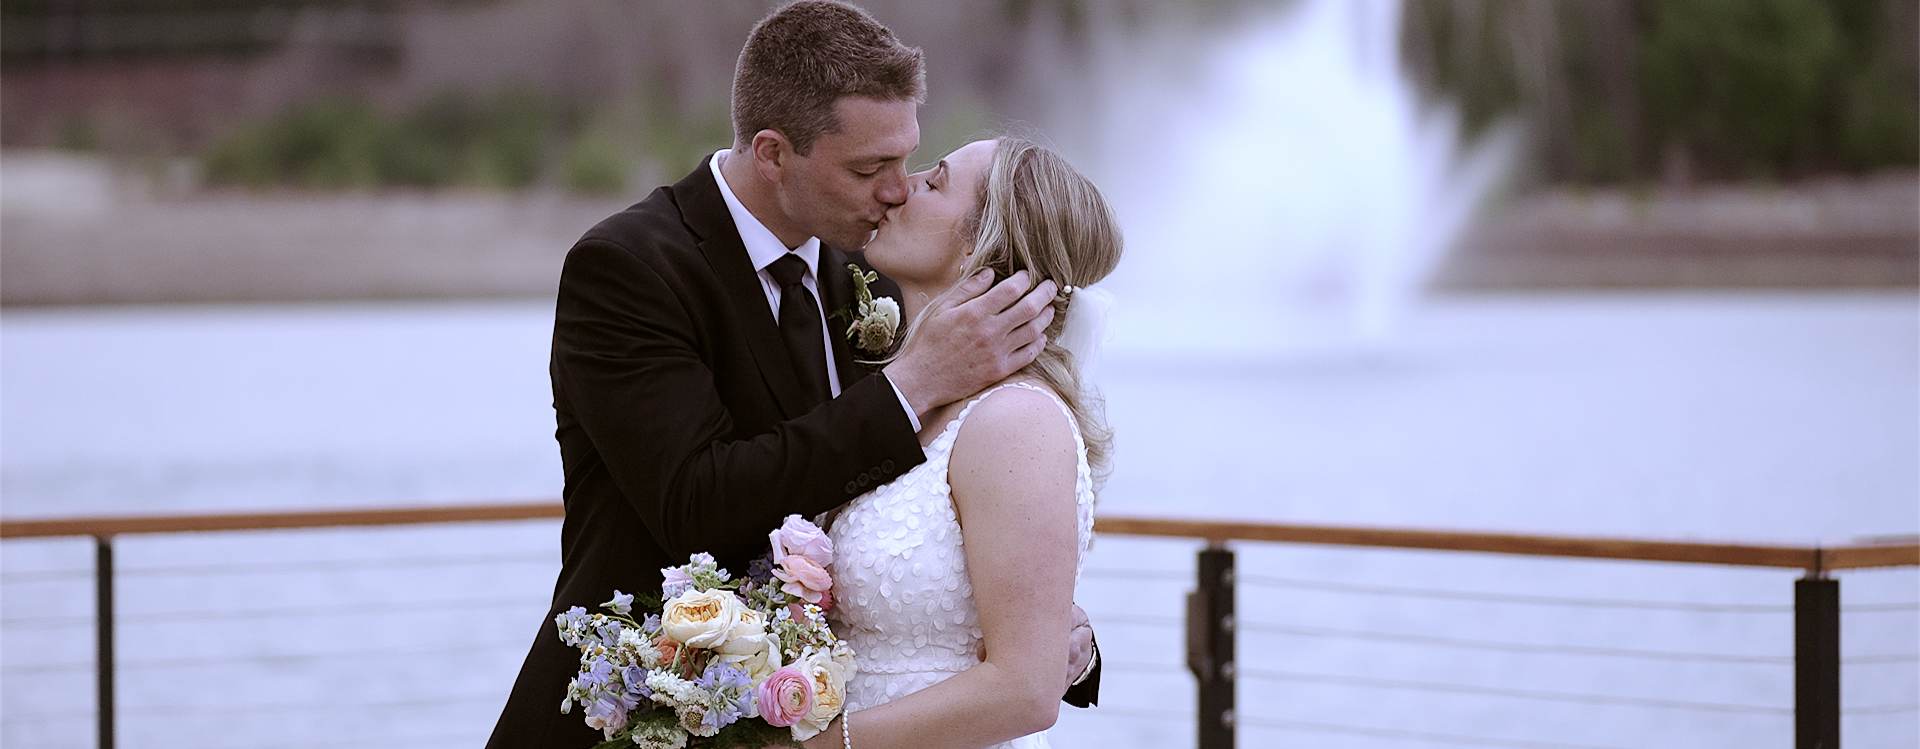 Couple kissing in front of a lake with a fountain. Groom is wearing a black suit and is standing to the right facing the bride. The bride is wearing a white sleevless dress and holding a colorful bouquet. The groom has his right hand up on the left side of the brides face.